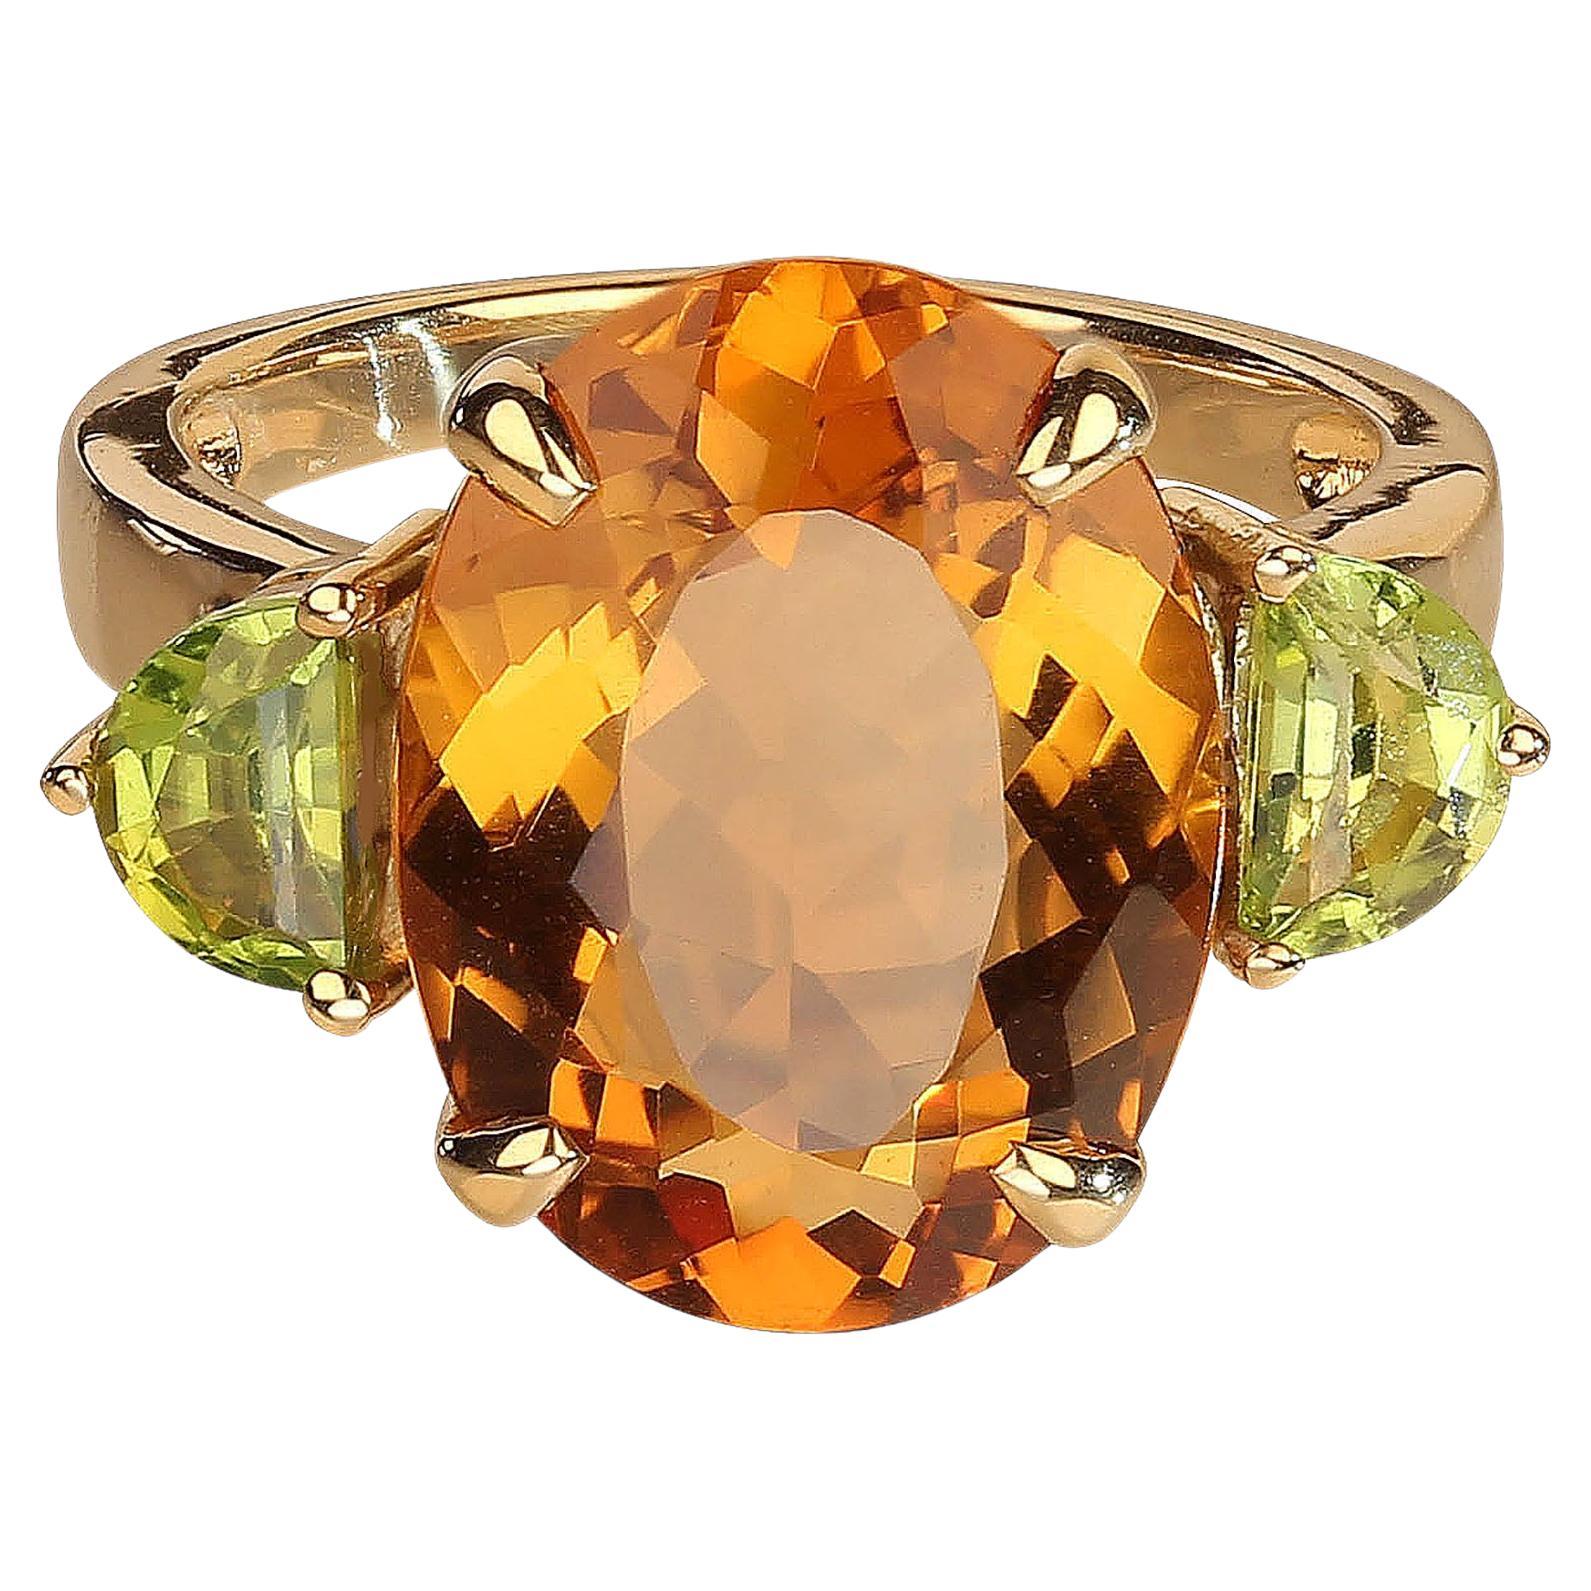 AJD Unique 18K Yellow Gold and Citrine and Peridot Ring